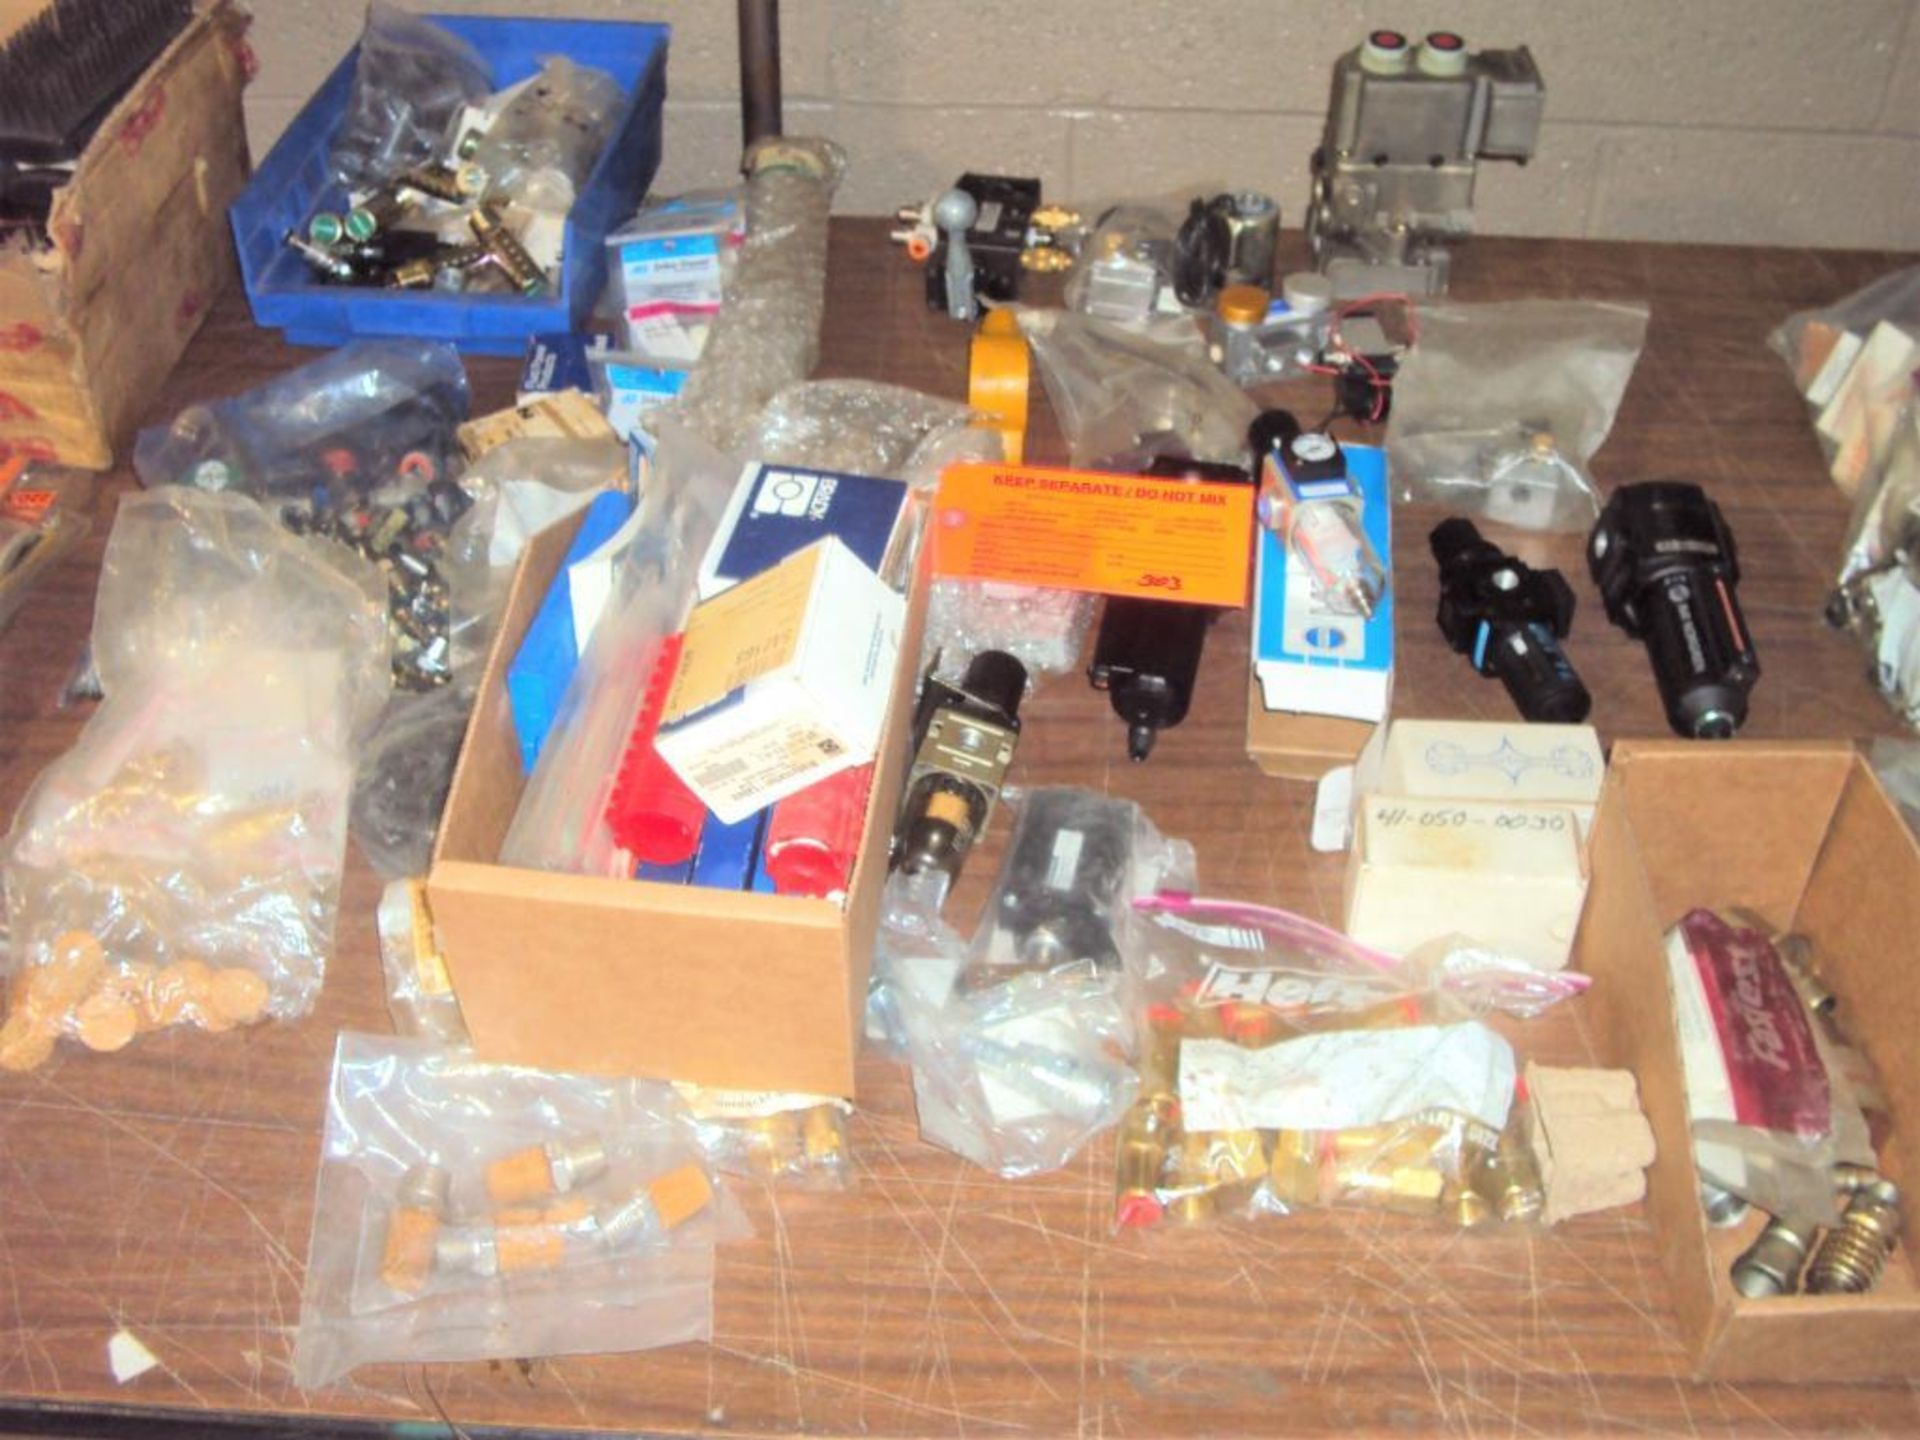 Assorted Pneumatic Components